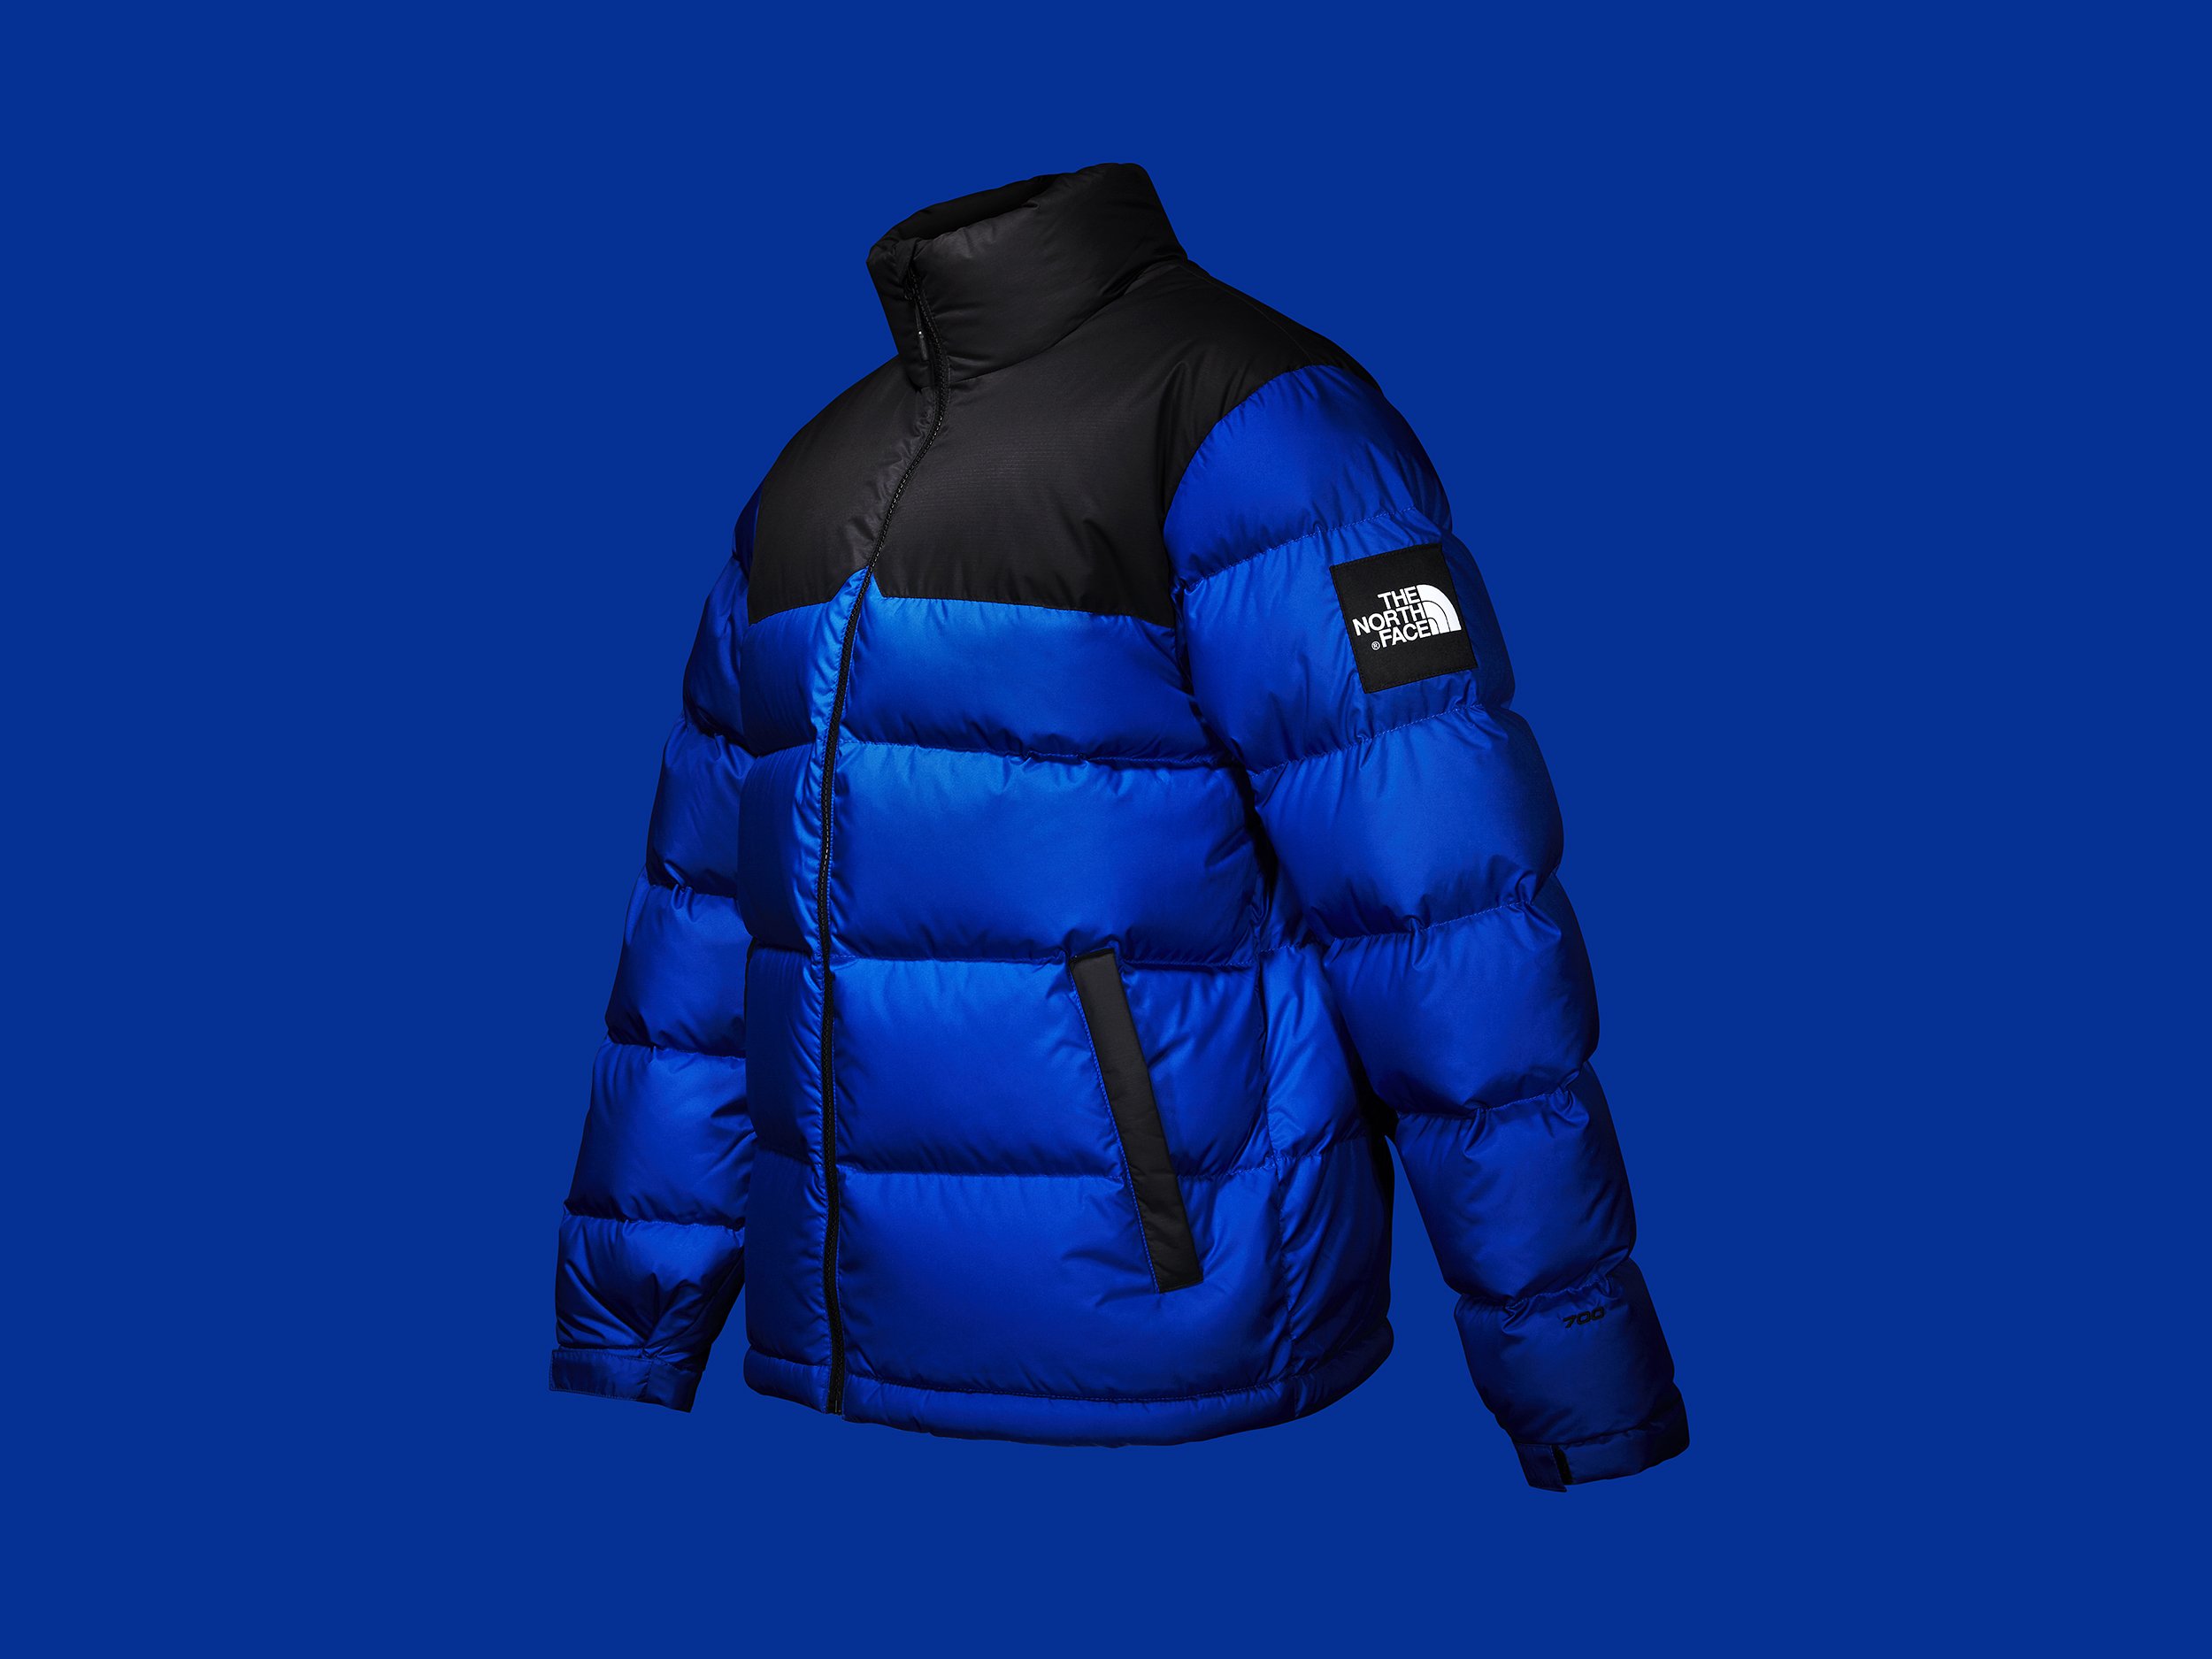 North Face Nupste 2 Jacket in Cobalt Blue - shot by advertising photographer Simon Lyle Ritchie